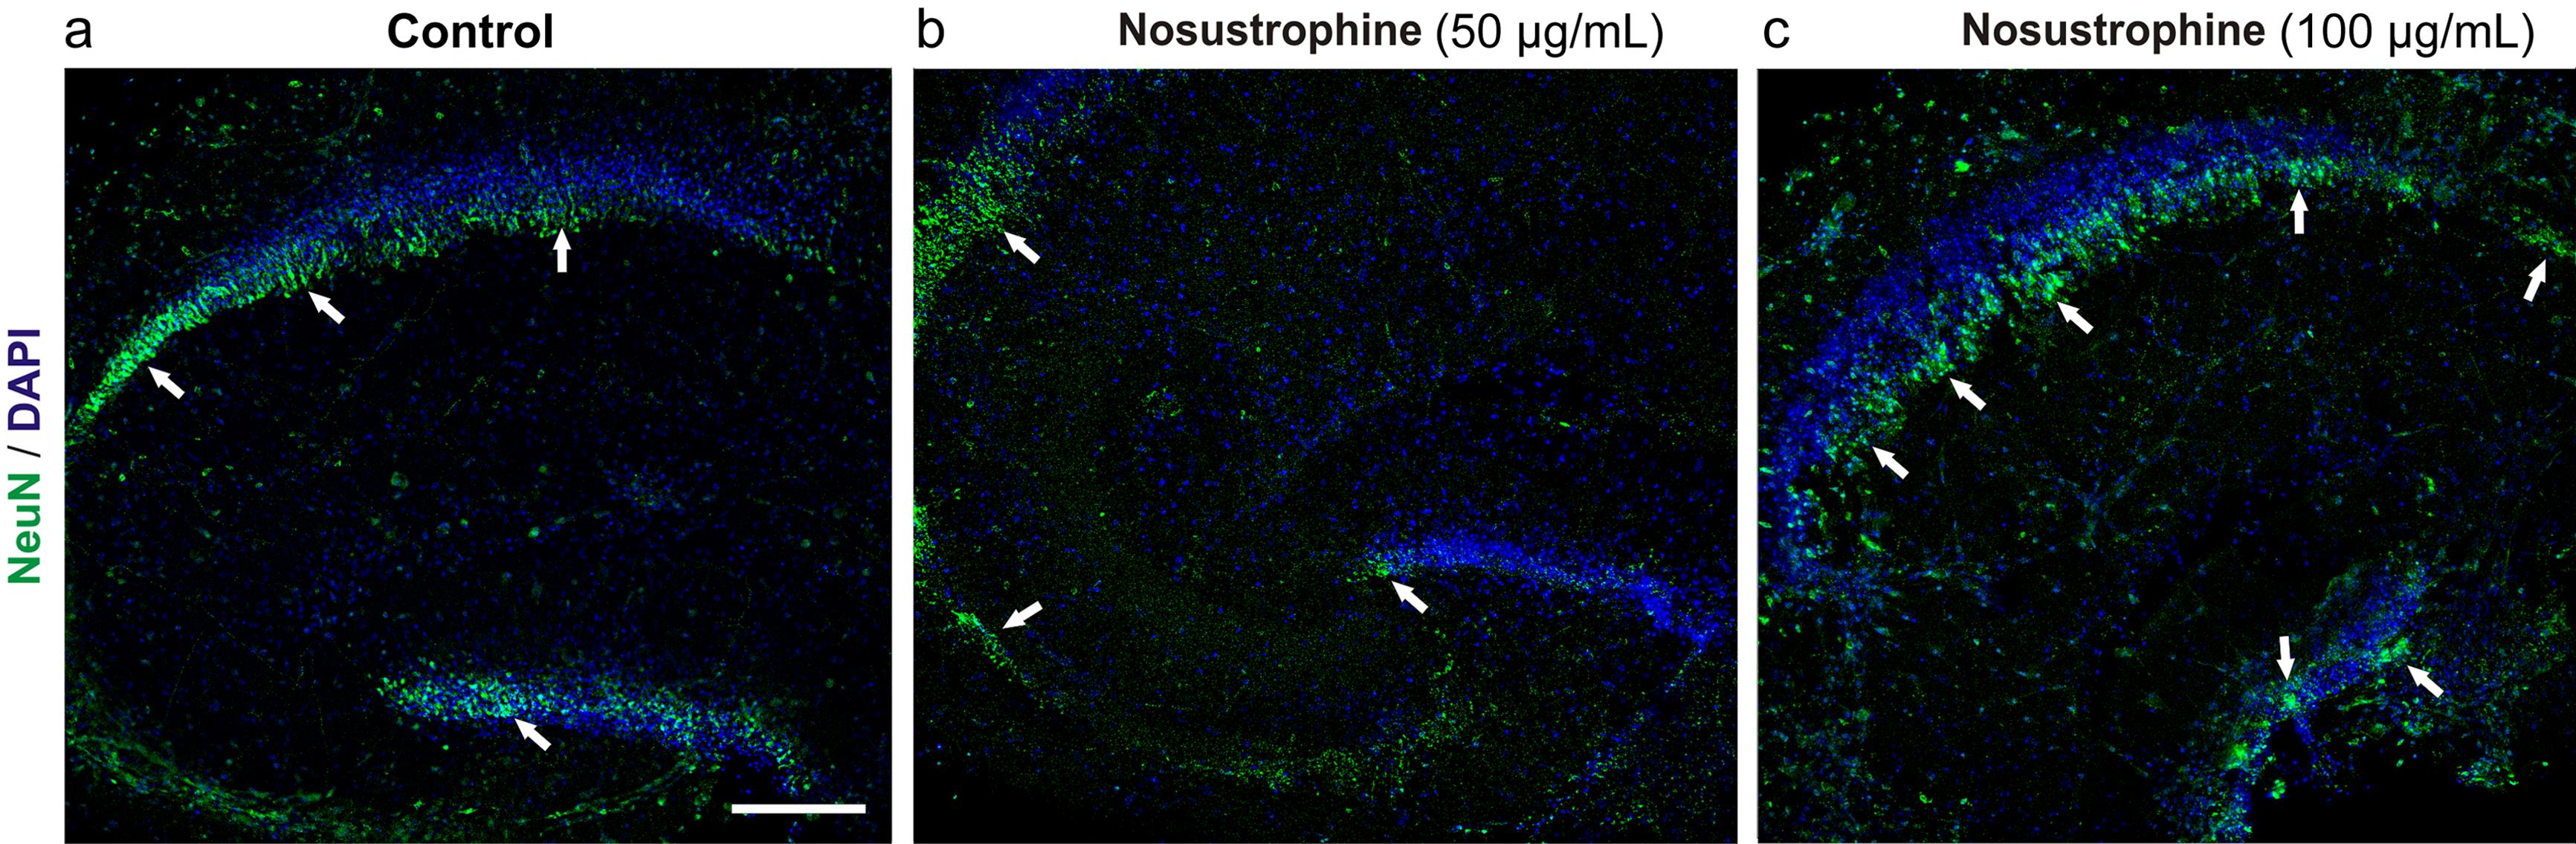 Nosustrophine is protective against Aβ1-42-induced neurodegeneration in organotypic hippocampal slice cultures.